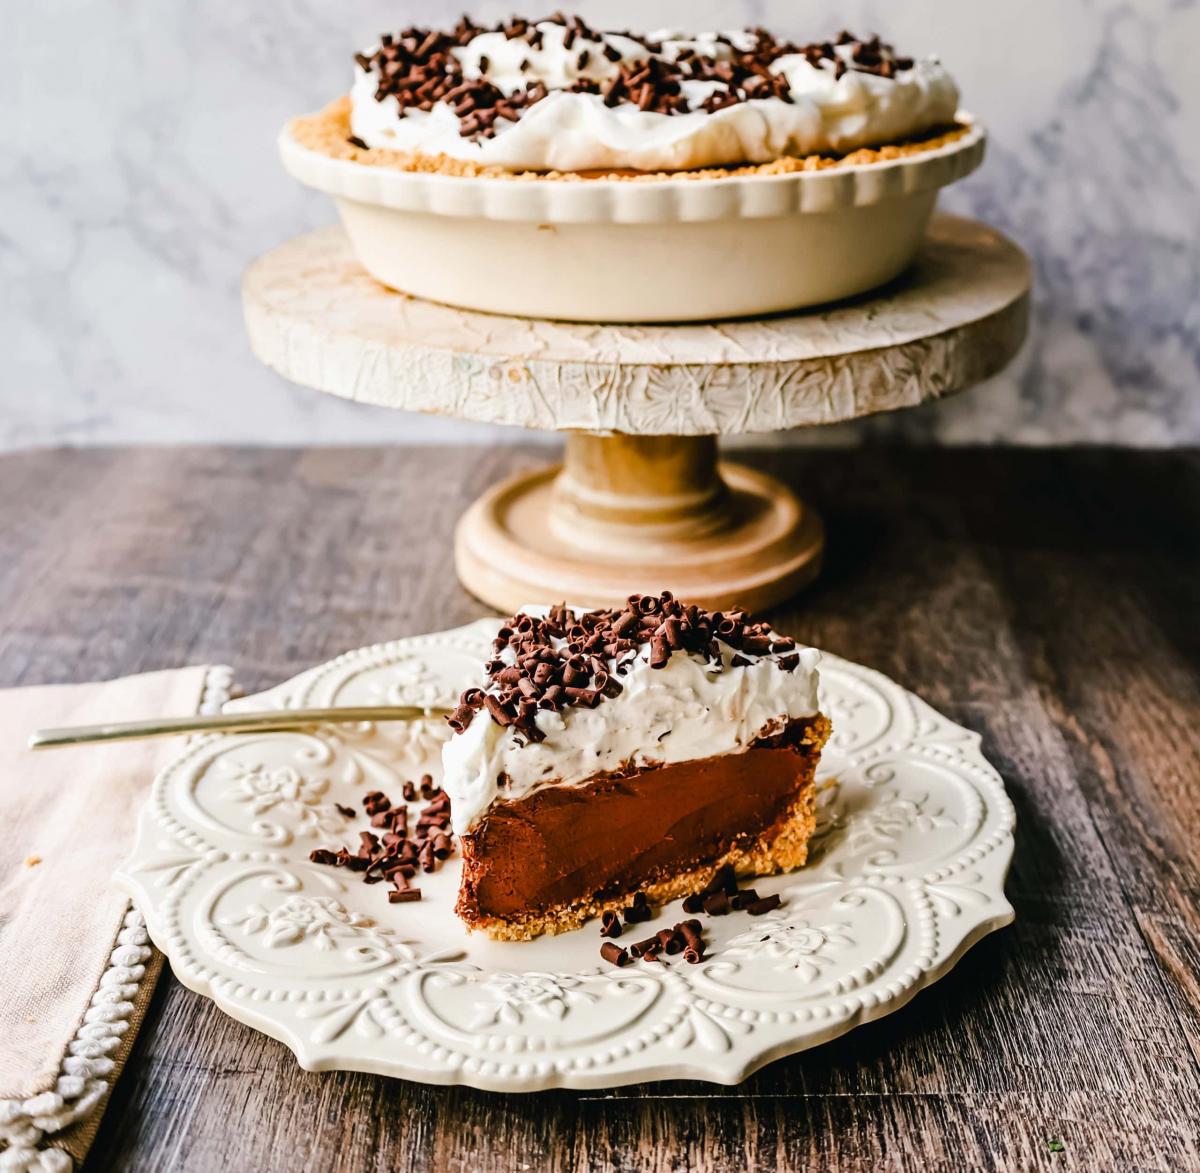 Slice of french silk pie topped with whipped cream and curls of chocolate on a white plate on a wooden surface.  The rest of the pie sits on a cake stand in a white pie dish behind the plate.